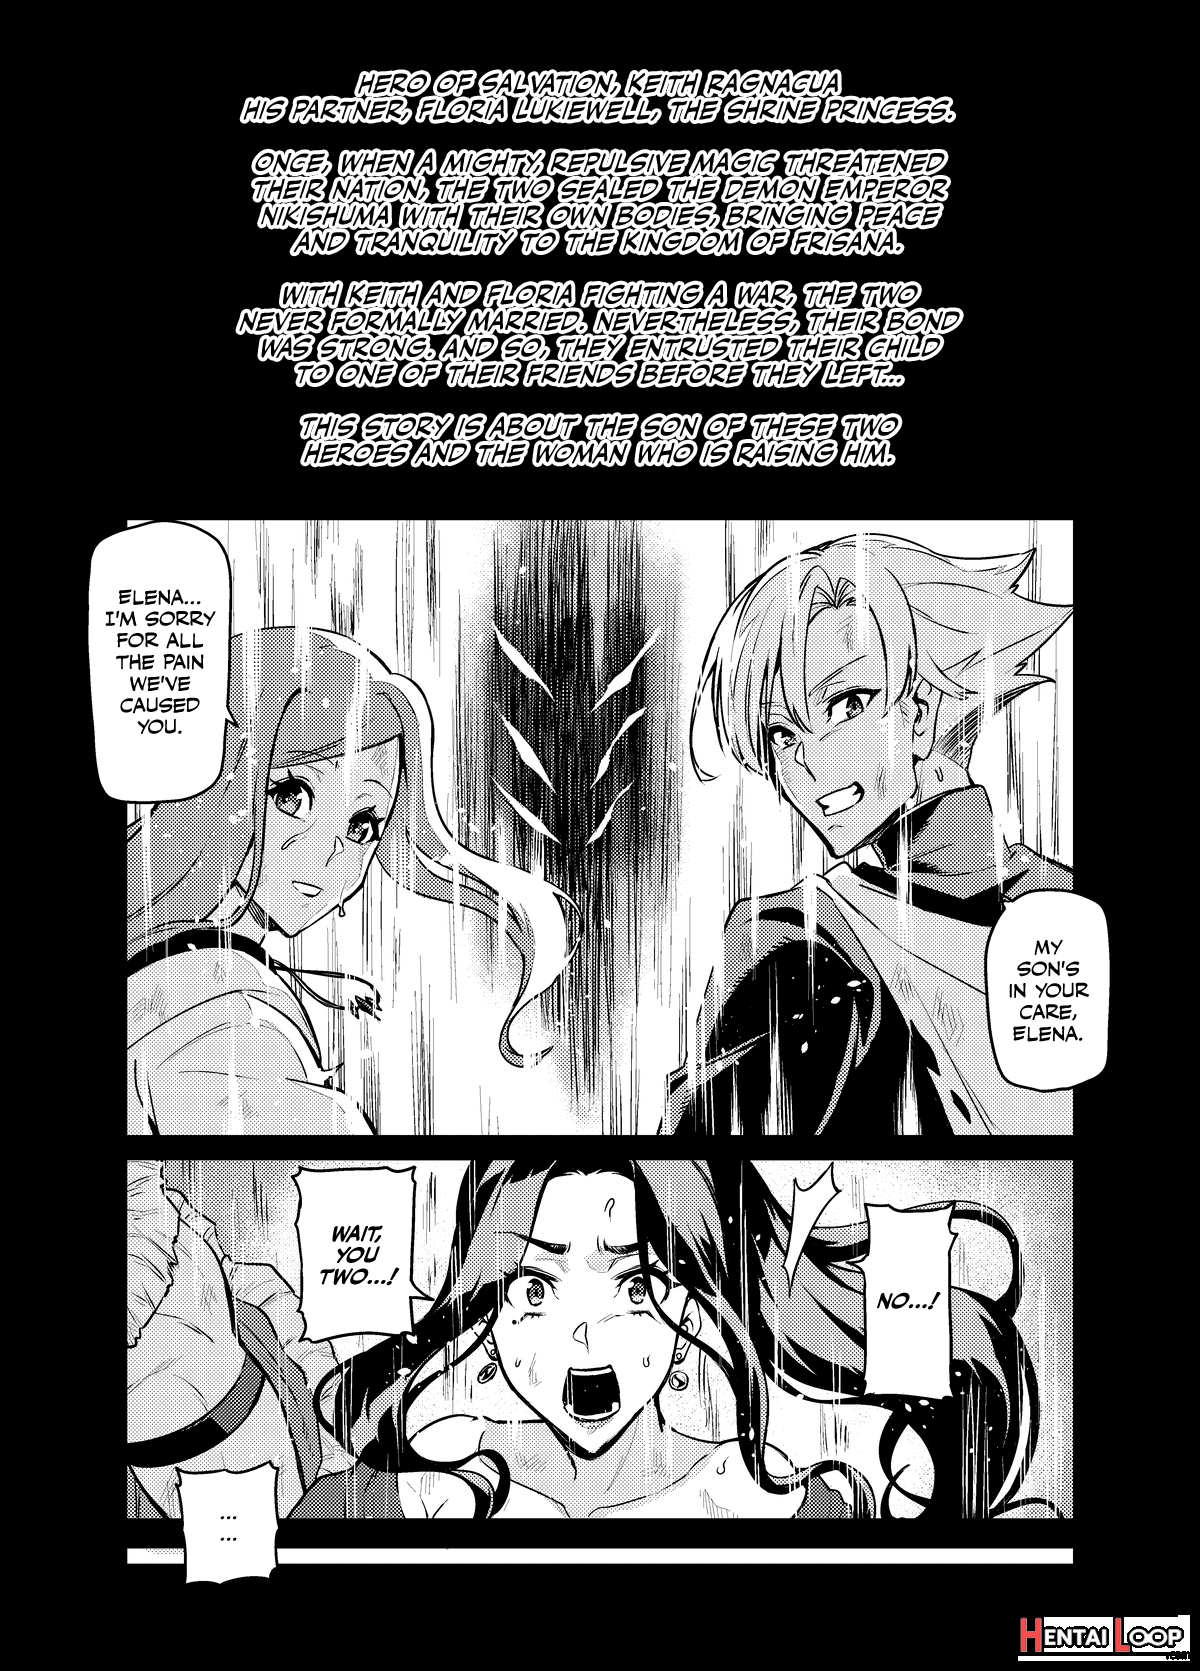 High Wizard Elena ~the Witch Who Fell In Love With The Child Entrusted To Her By Her Past Sweetheart~ Chapter 1, 3-5 page 3